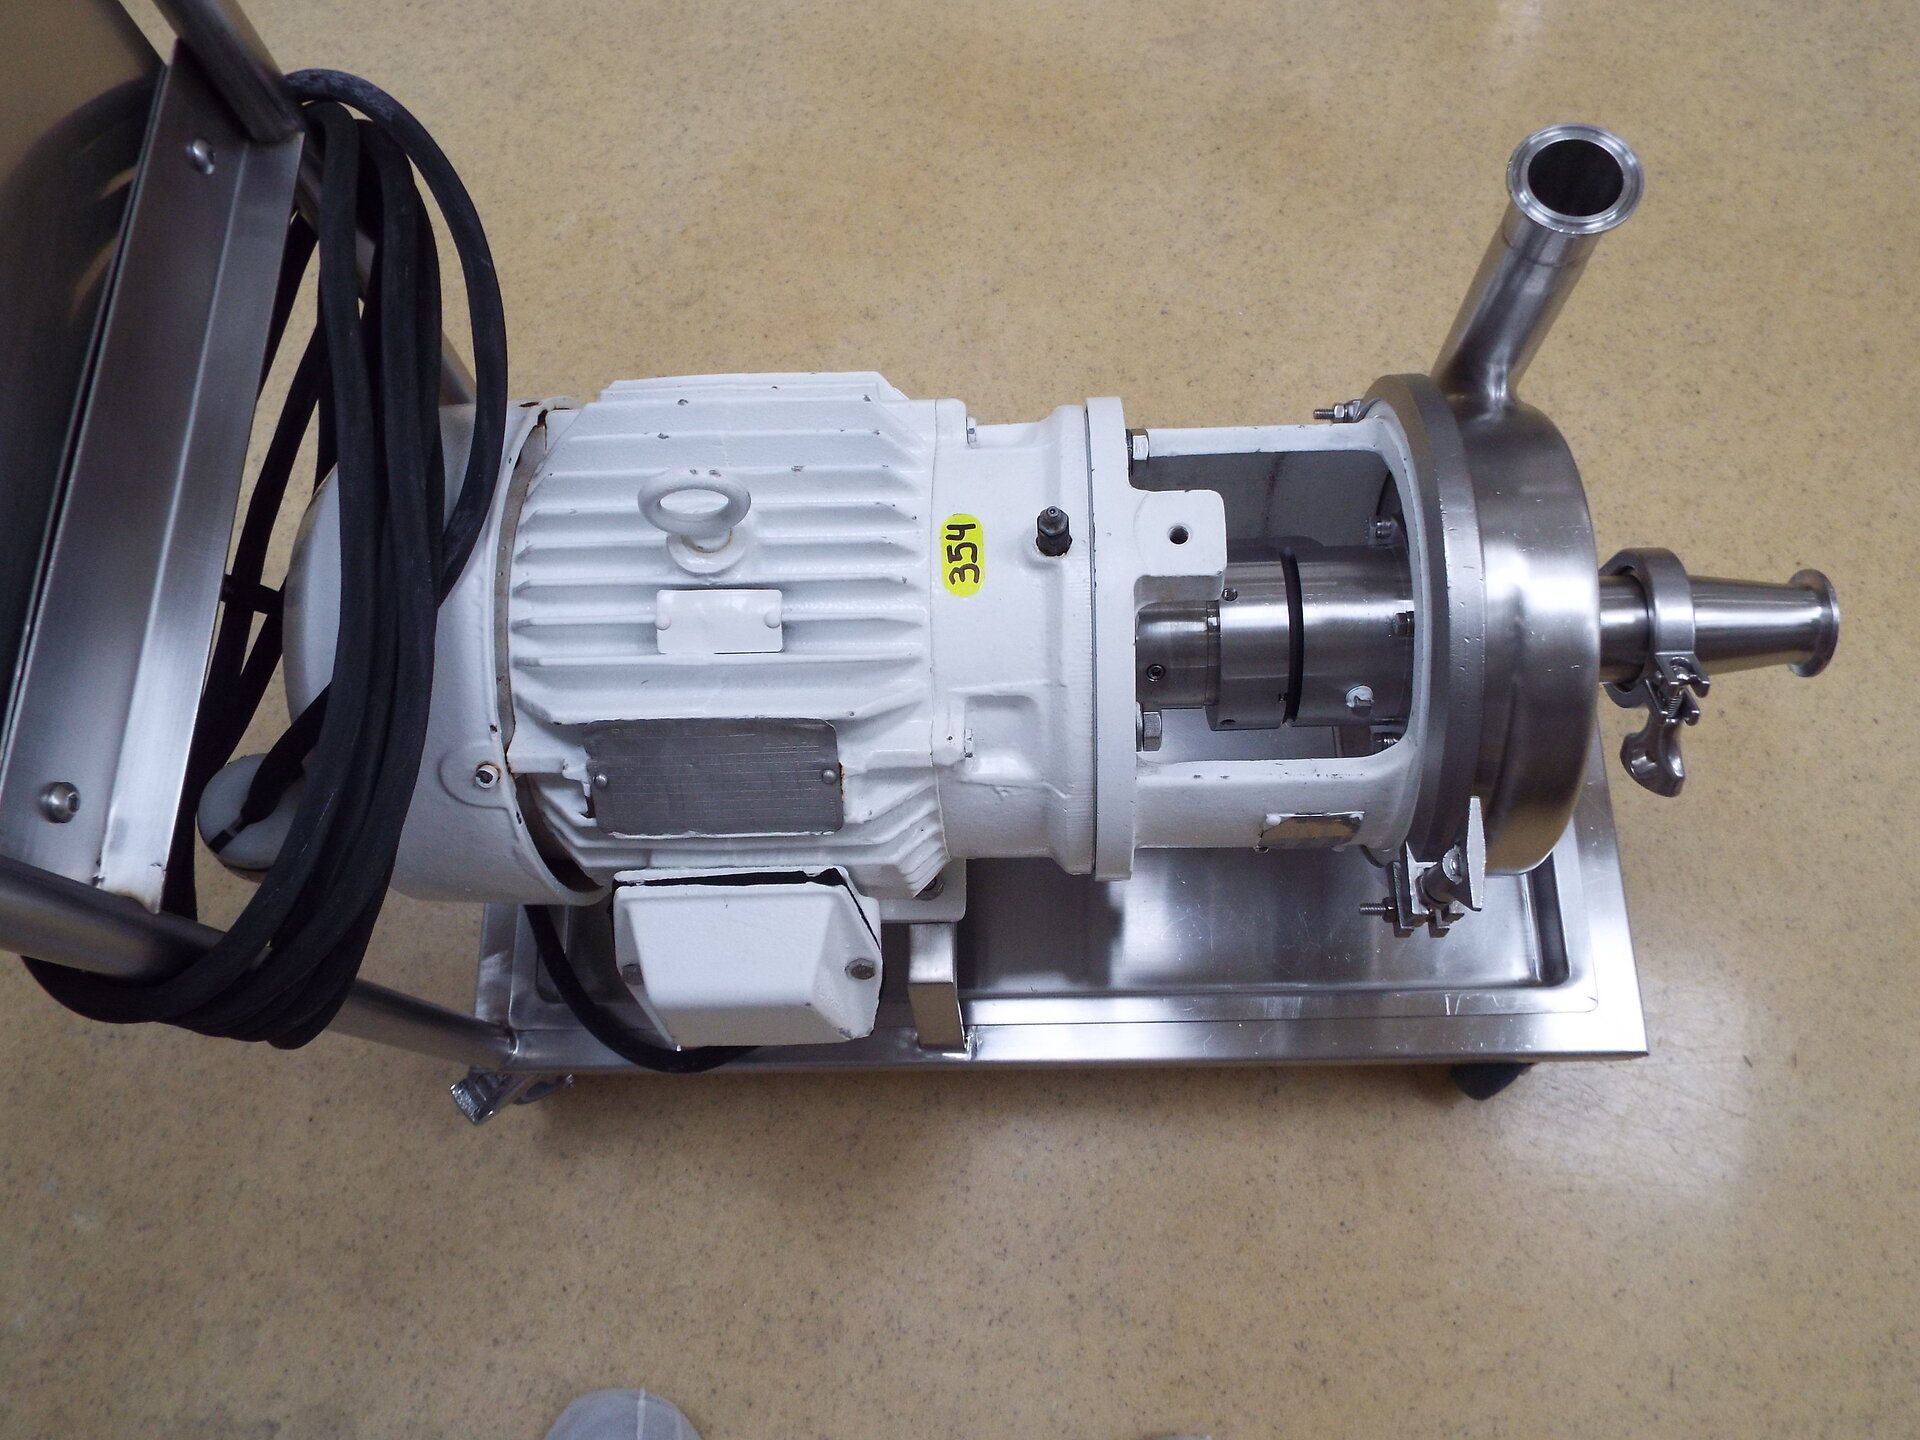 APD 5 HP stainless steel centrifugal pump 8" diameter impeller, stainless steel base on casters - Image 2 of 4